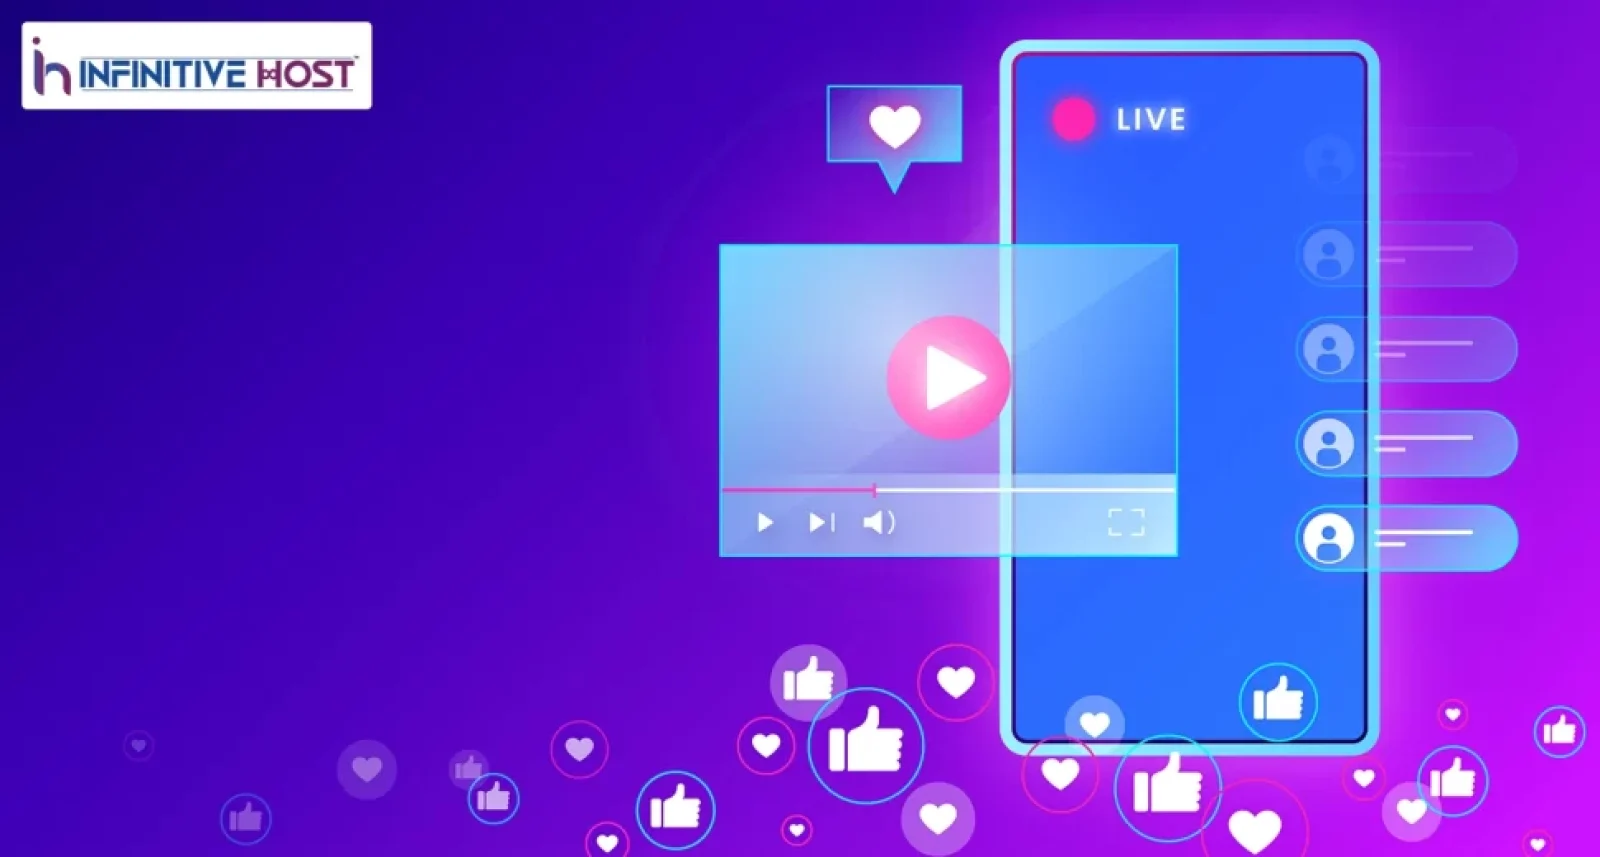 4 Best Live Streaming Software trending in 2021